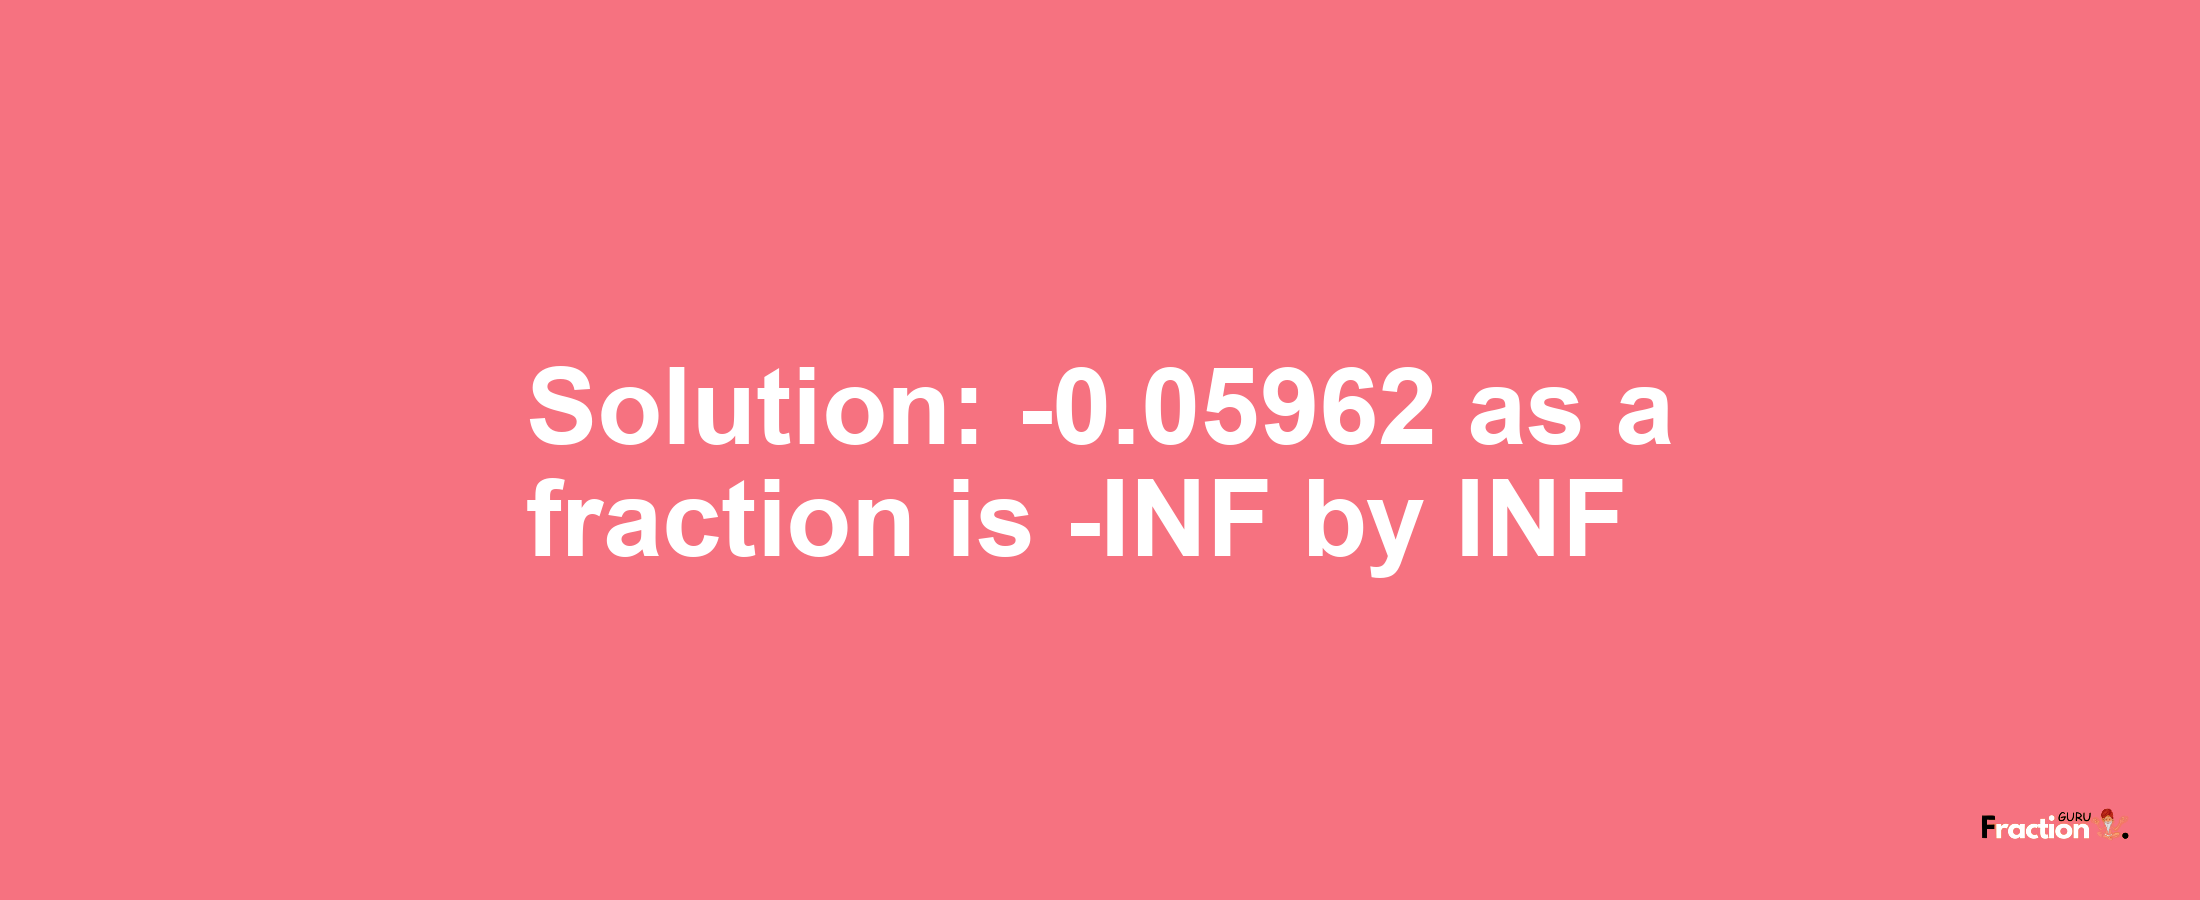 Solution:-0.05962 as a fraction is -INF/INF